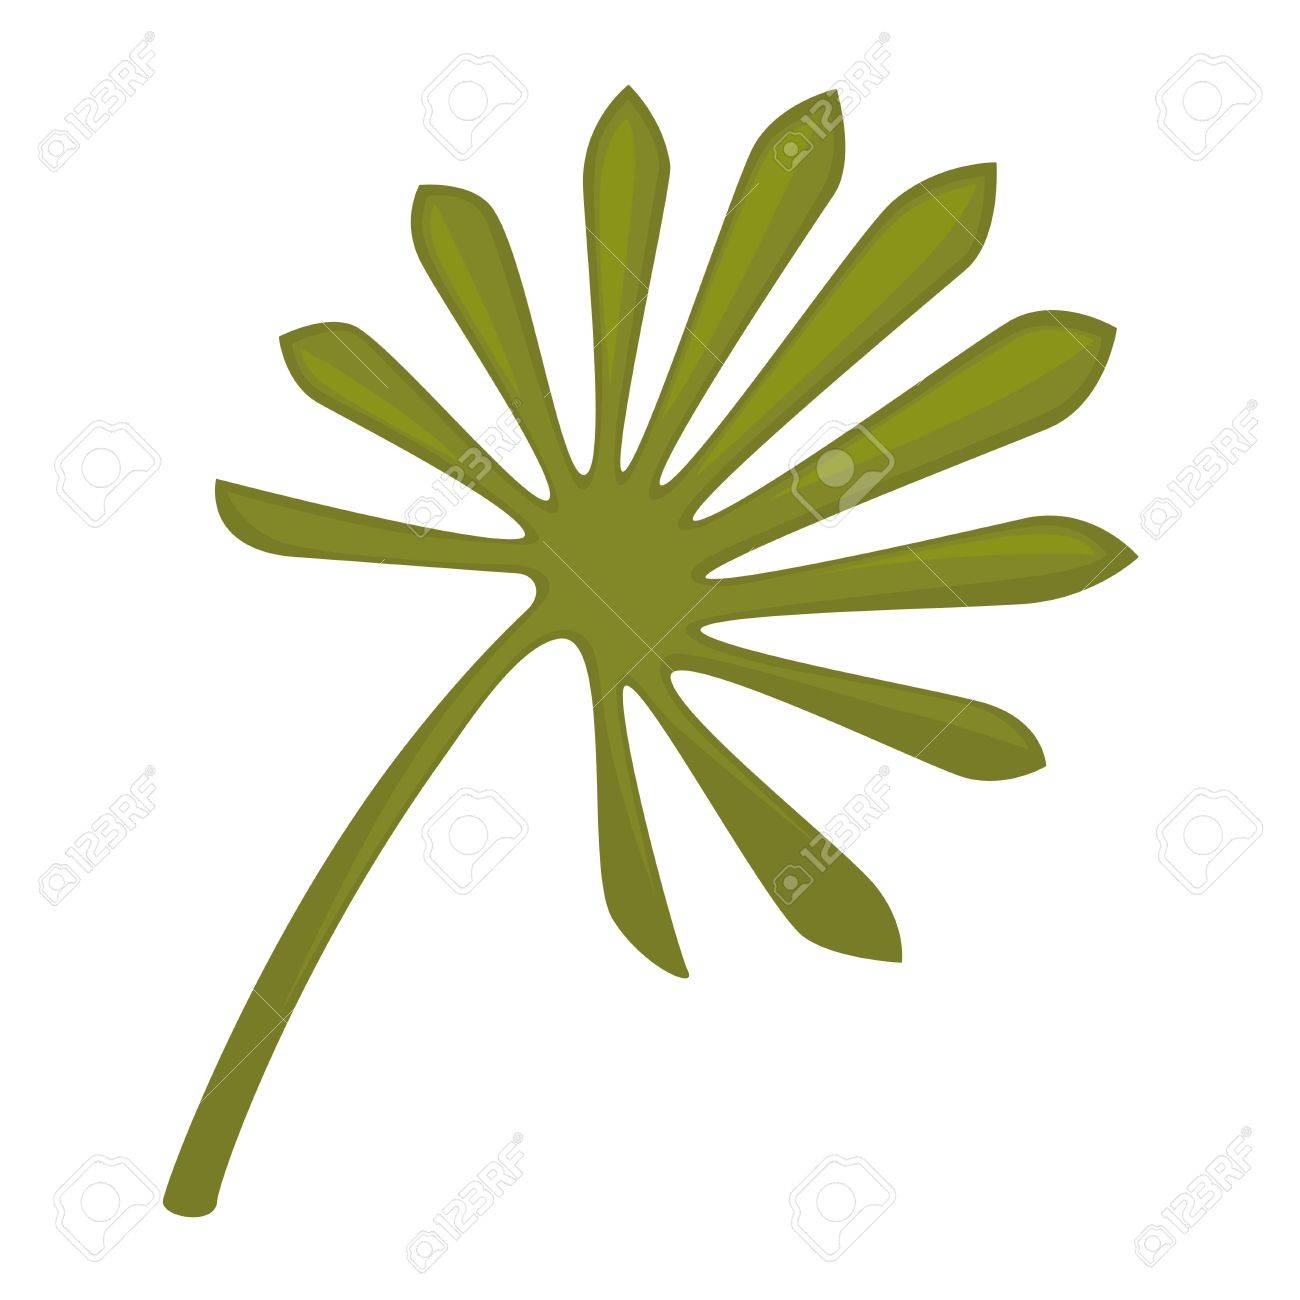 Saw Palmetto Leaf Isolated On White Background Big Green Plant